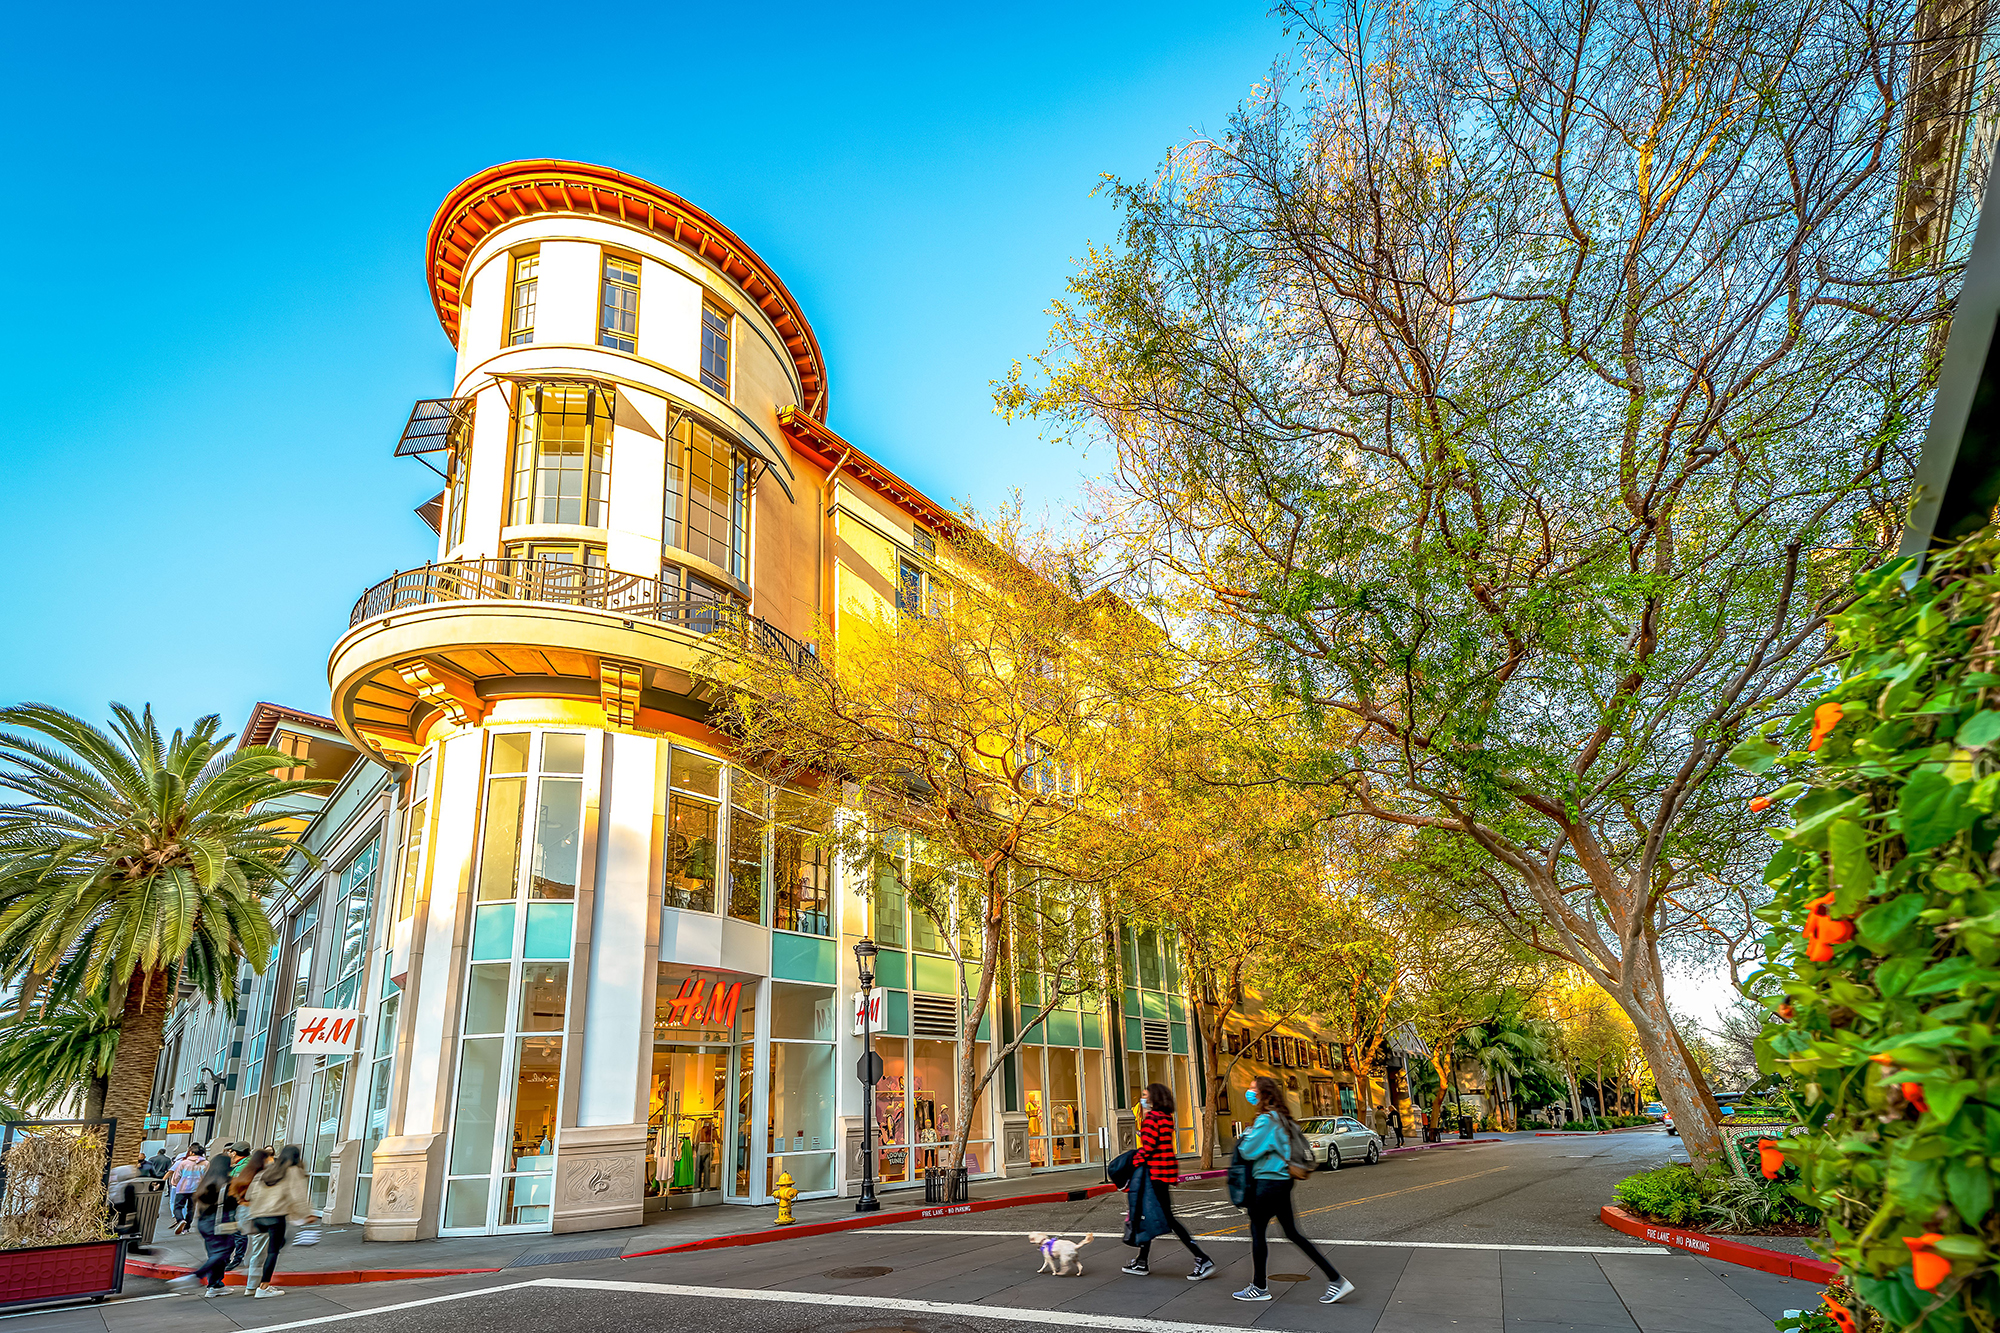 10 Best Places to Go Shopping in San Jose - Where to Shop and What